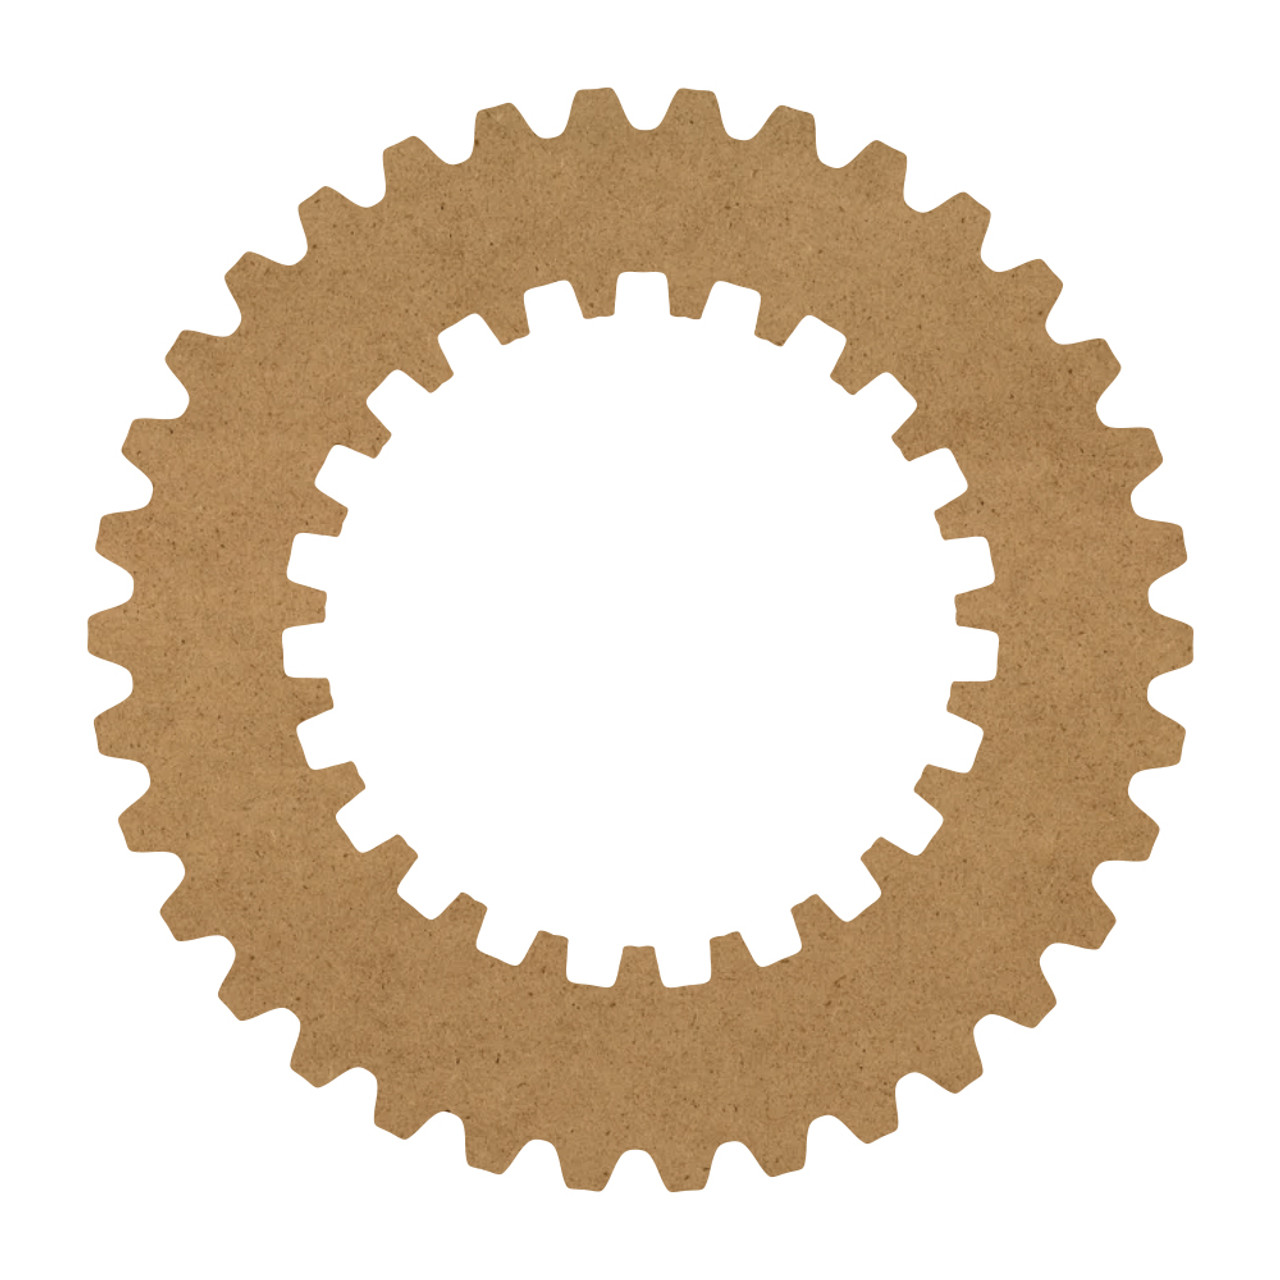 Spur Gear Wood Surface - 16" x 16" - WDSF1413_5